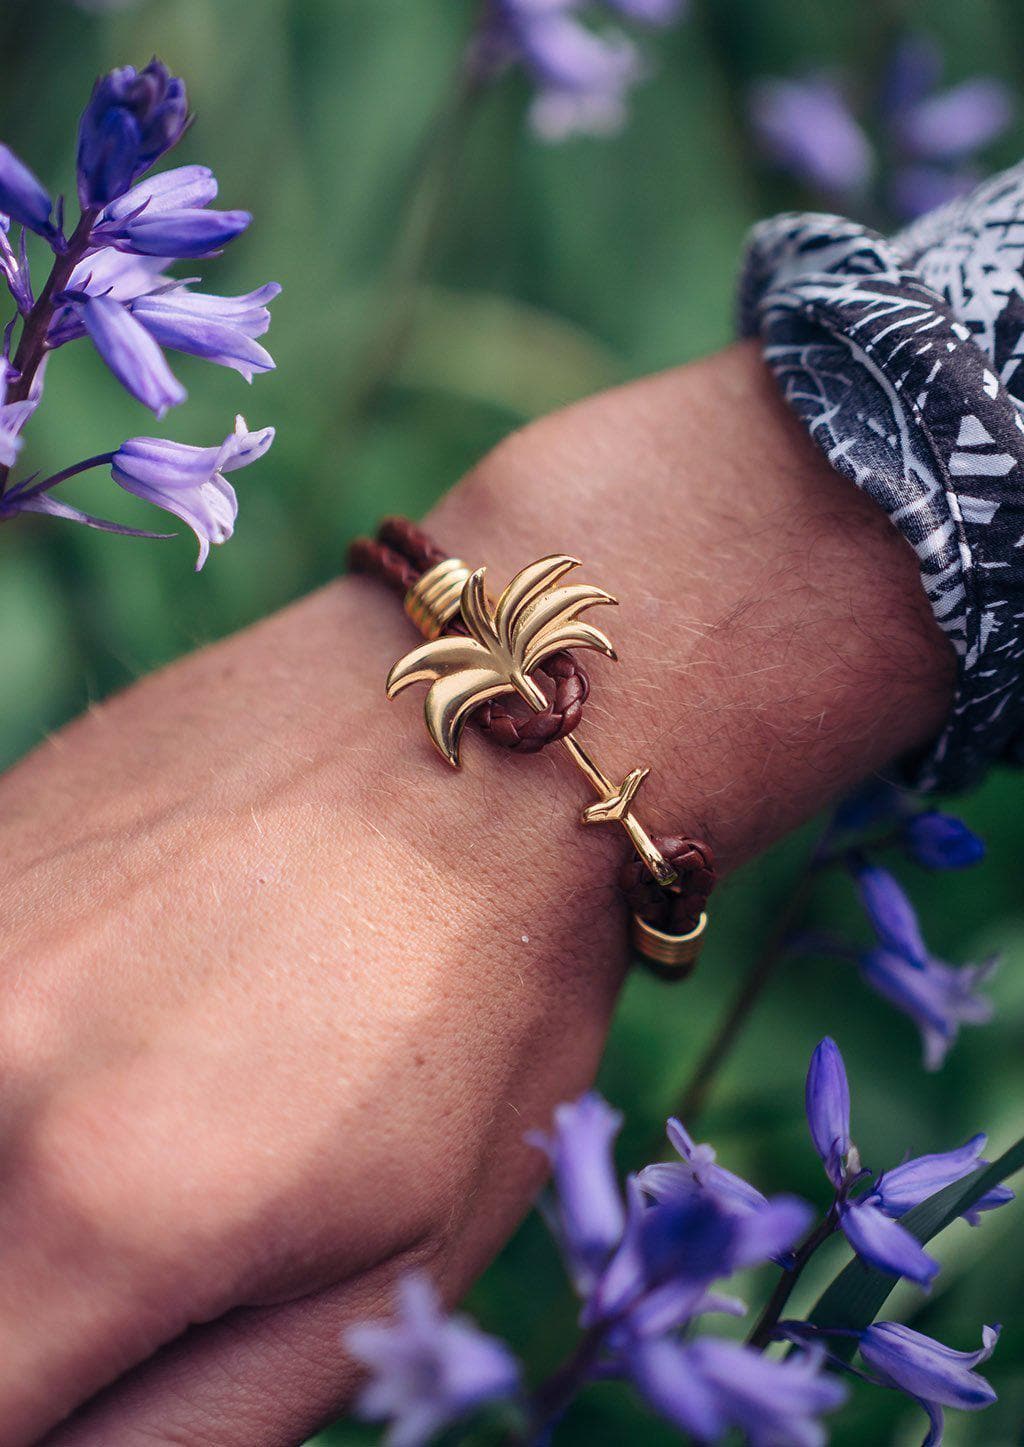 Sunrise Gold - Palm anchor bracelet with brown leather. On models wrist.